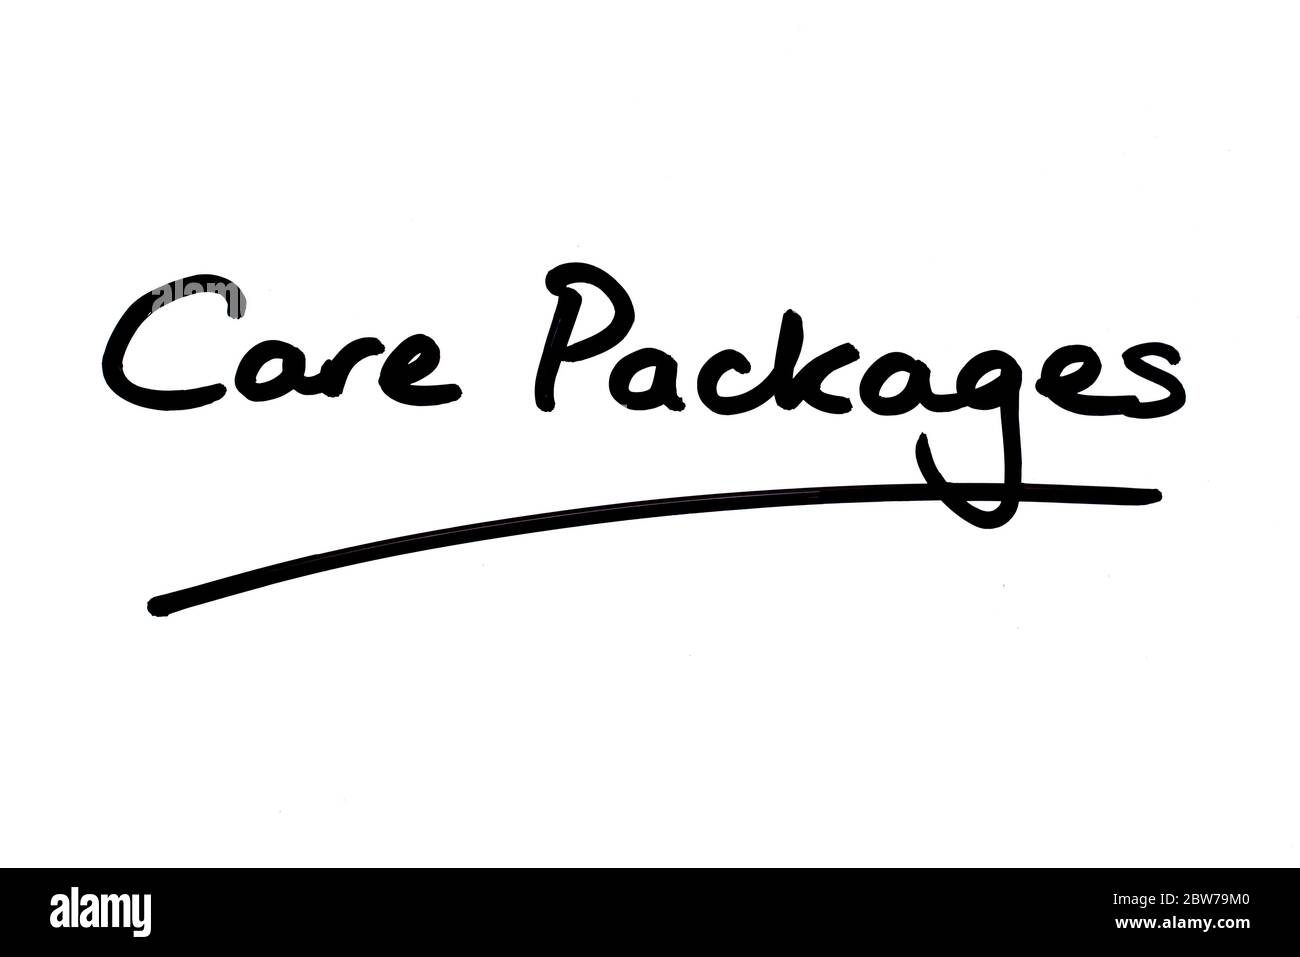 Care Packages handwritten on a white background. Stock Photo